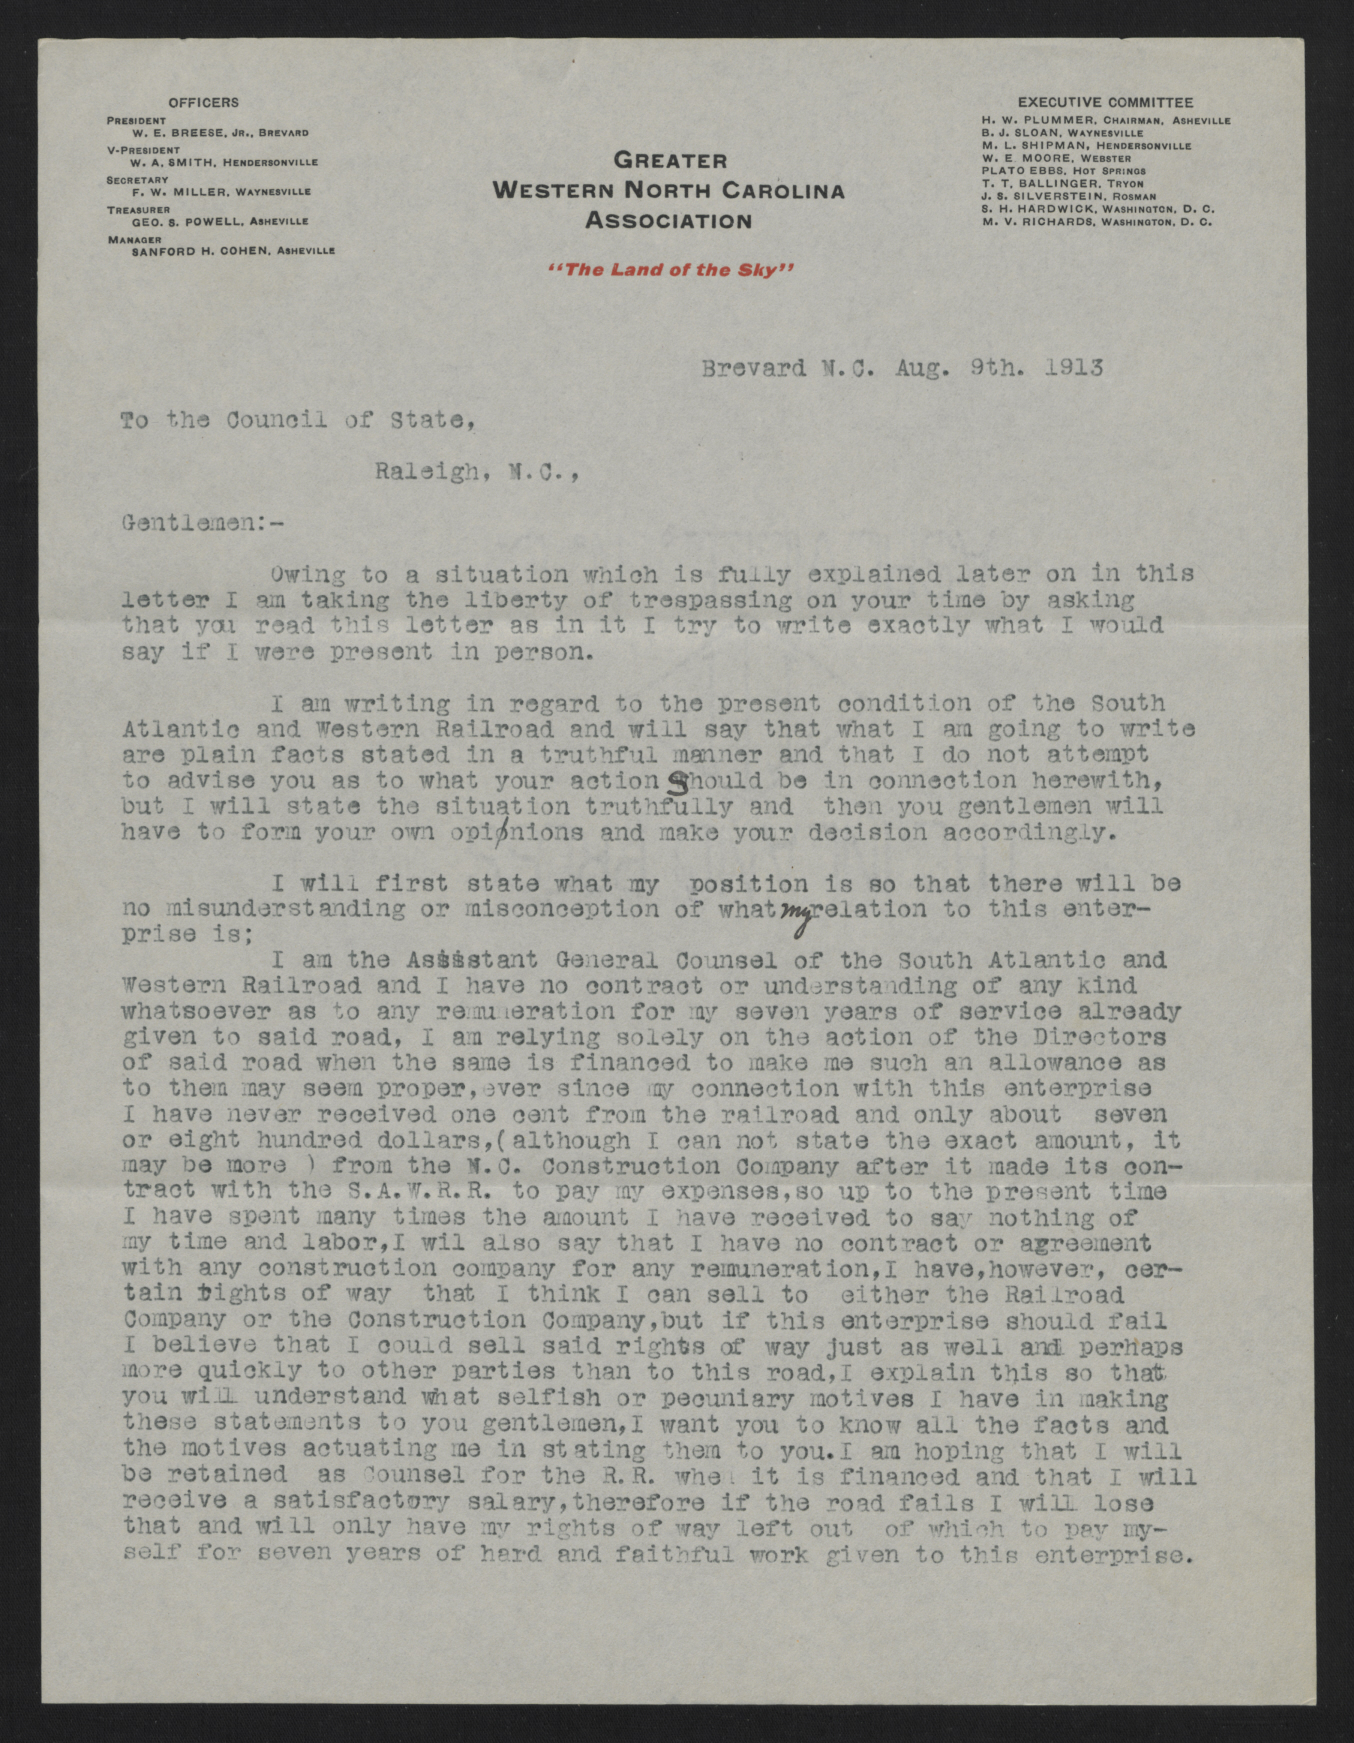 Letter from Breese to the Council of State, August 9, 1913, page 1